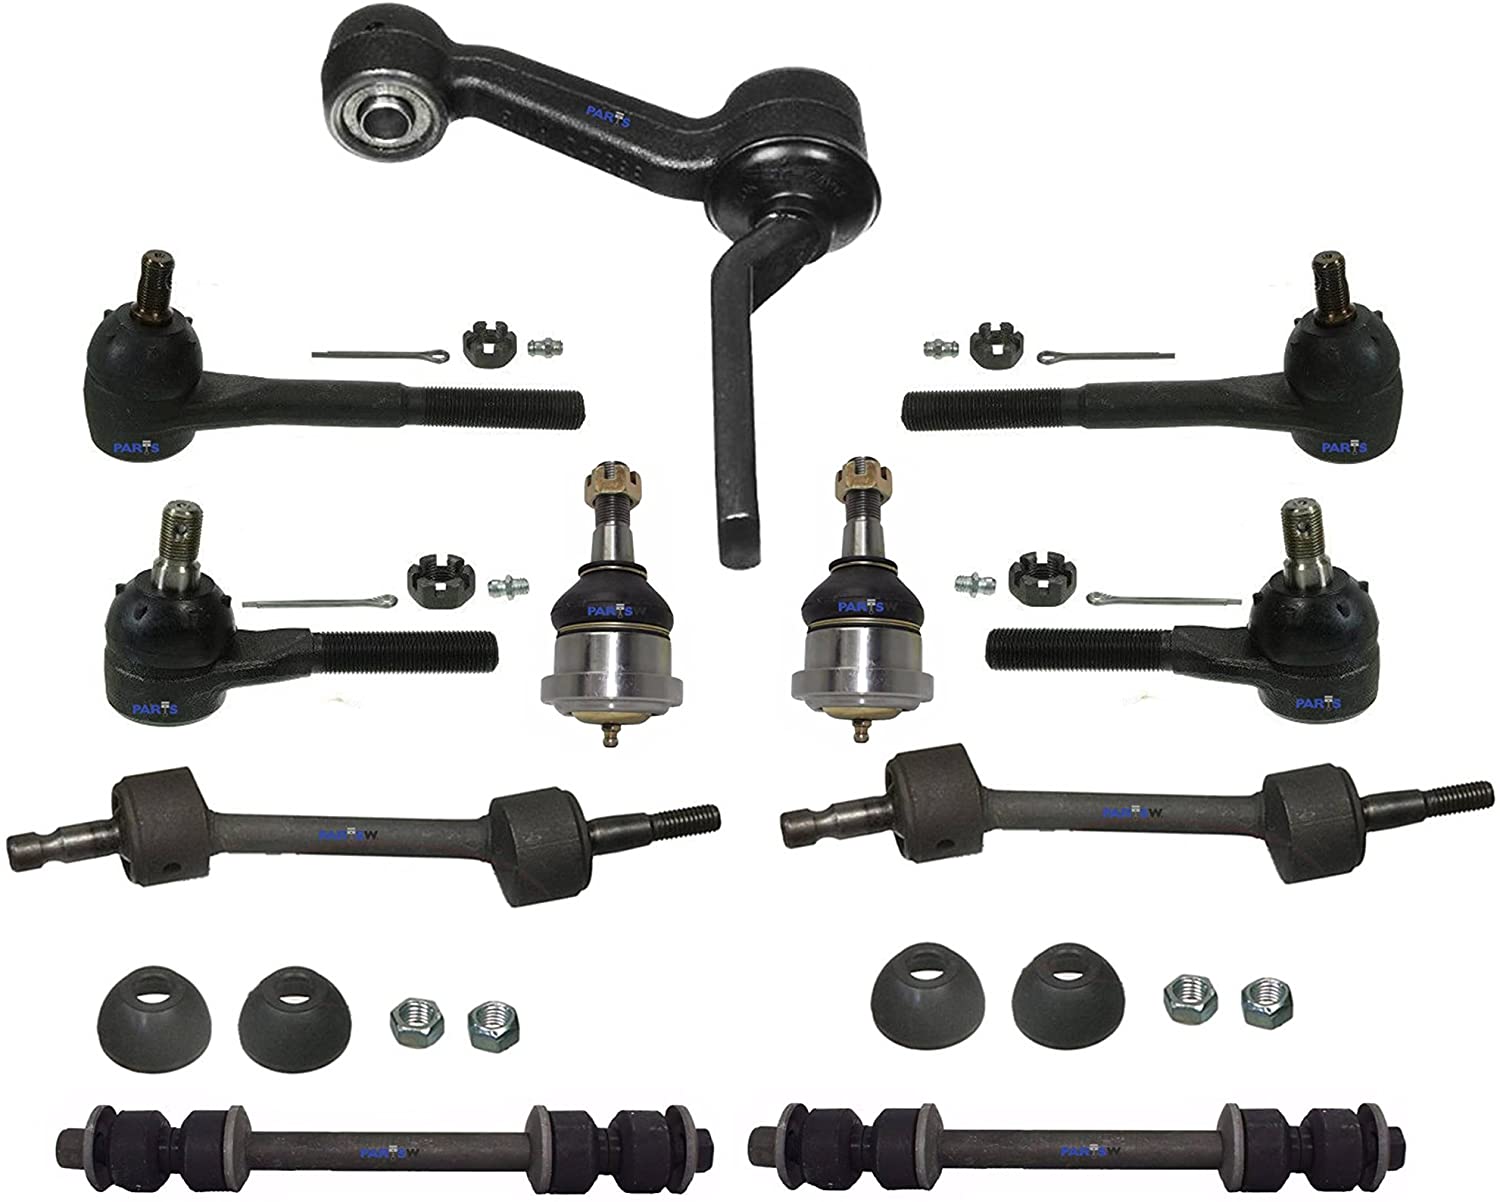 PartsW 11 Pc Front & Rear Suspension Kit for Ford Crown Victoria Lincoln Town Car Mercury Grand Marquis Inner & Outer Tie Rod Ends, Lower Ball Joints, Idler Arm, Sway Bar End Links